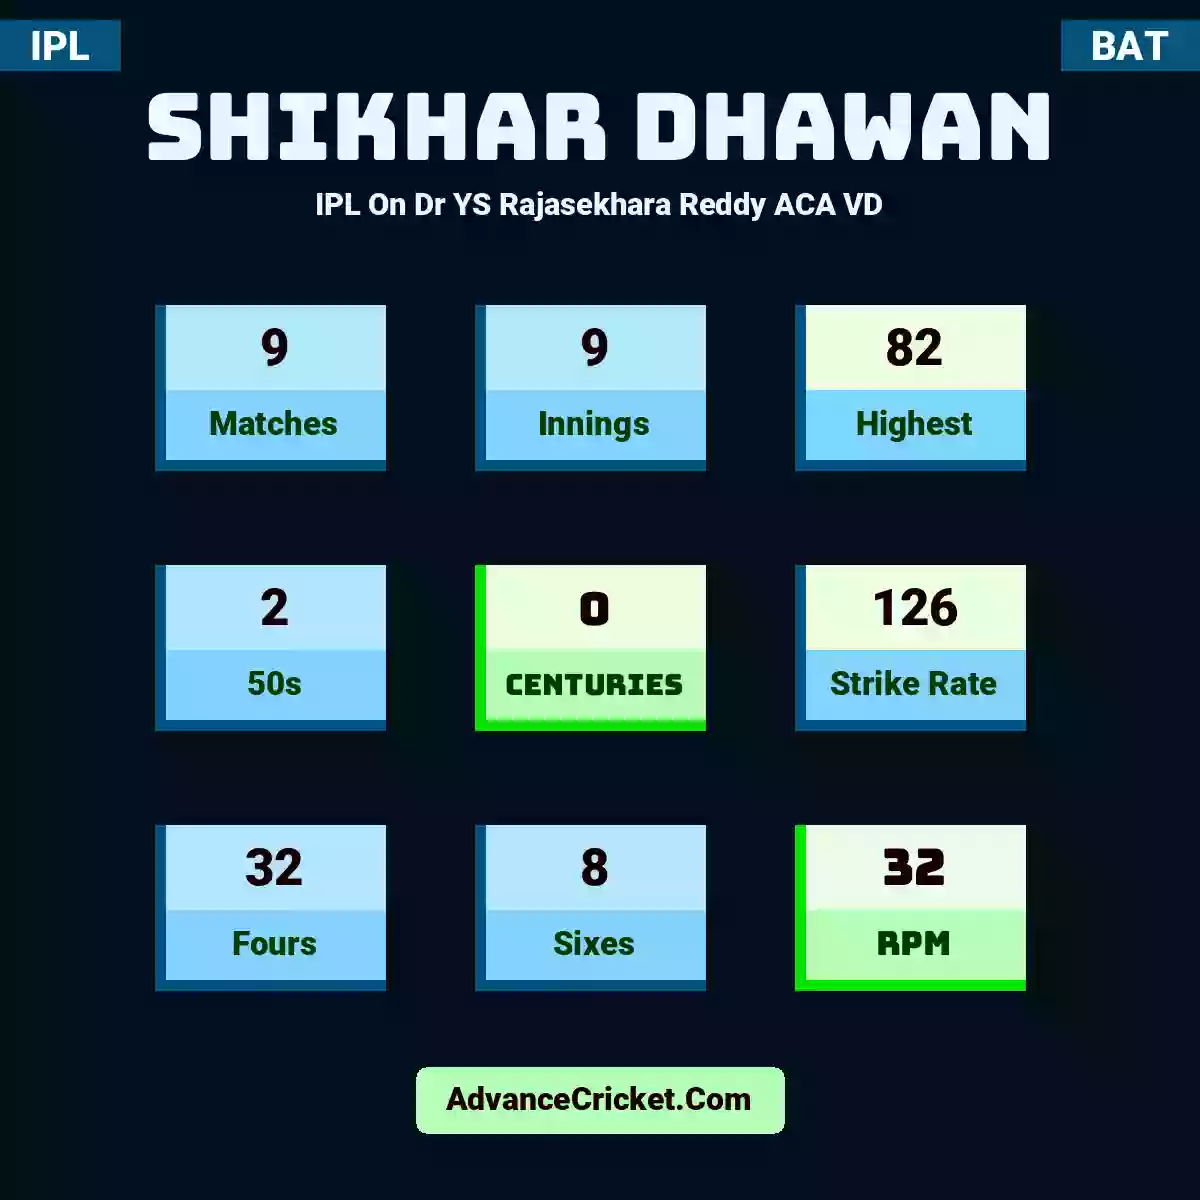 Shikhar Dhawan IPL  On Dr YS Rajasekhara Reddy ACA VD, Shikhar Dhawan played 9 matches, scored 82 runs as highest, 2 half-centuries, and 0 centuries, with a strike rate of 126. S.Dhawan hit 32 fours and 8 sixes, with an RPM of 32.